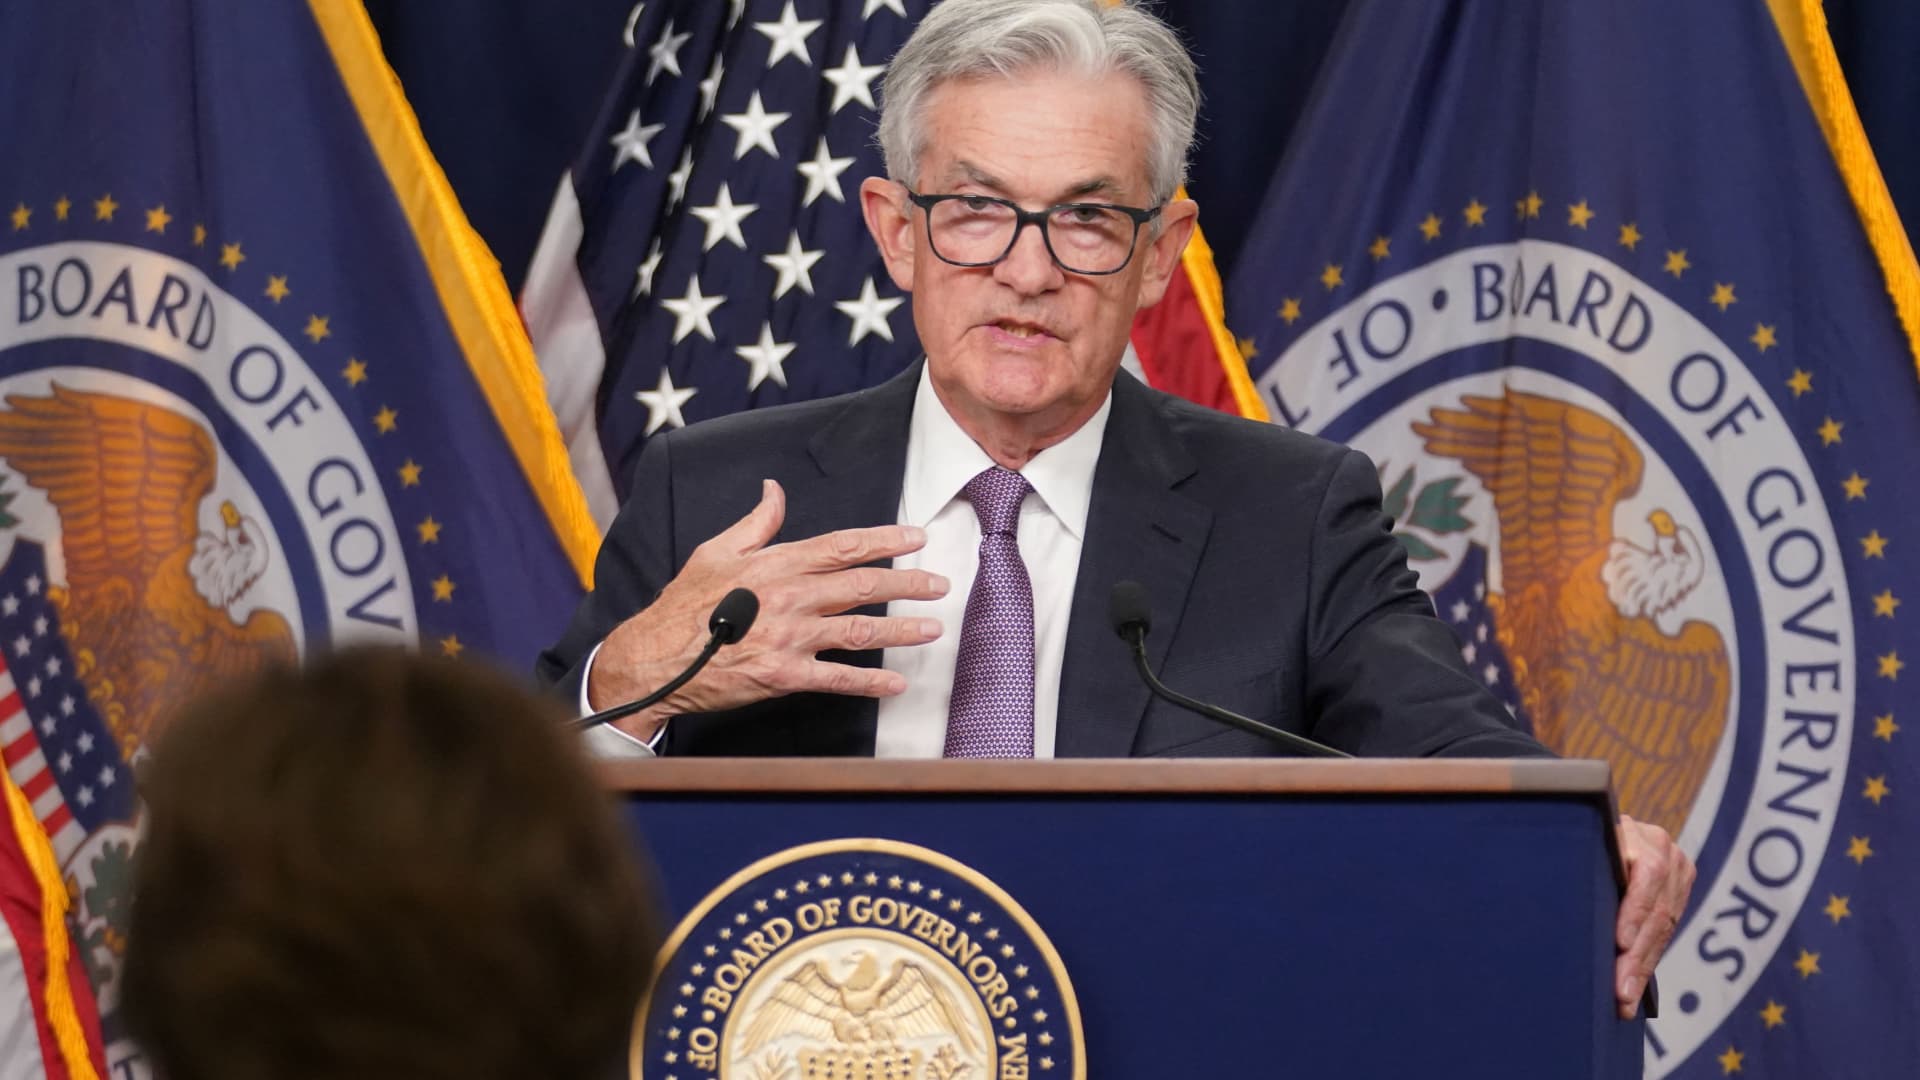 Markets are bracing for a ‘Powell recession’ that could be coming soon